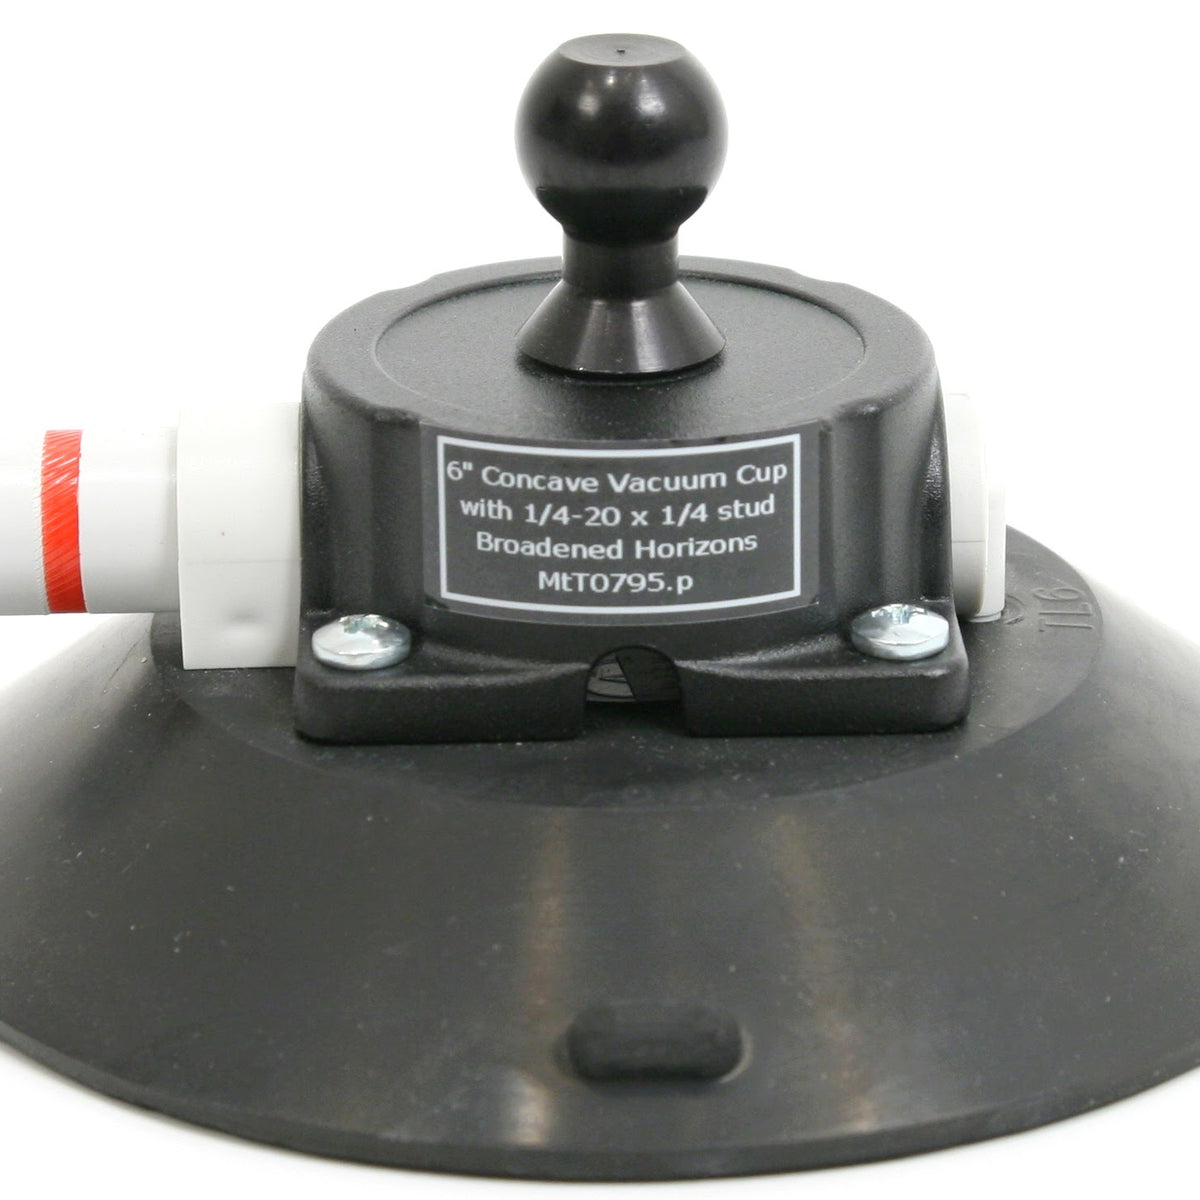 3rd Arm 6 inch Vacuum Suction Cup Base - Heavy Duty 75lbs with Plunger - Broadened Horizons Direct